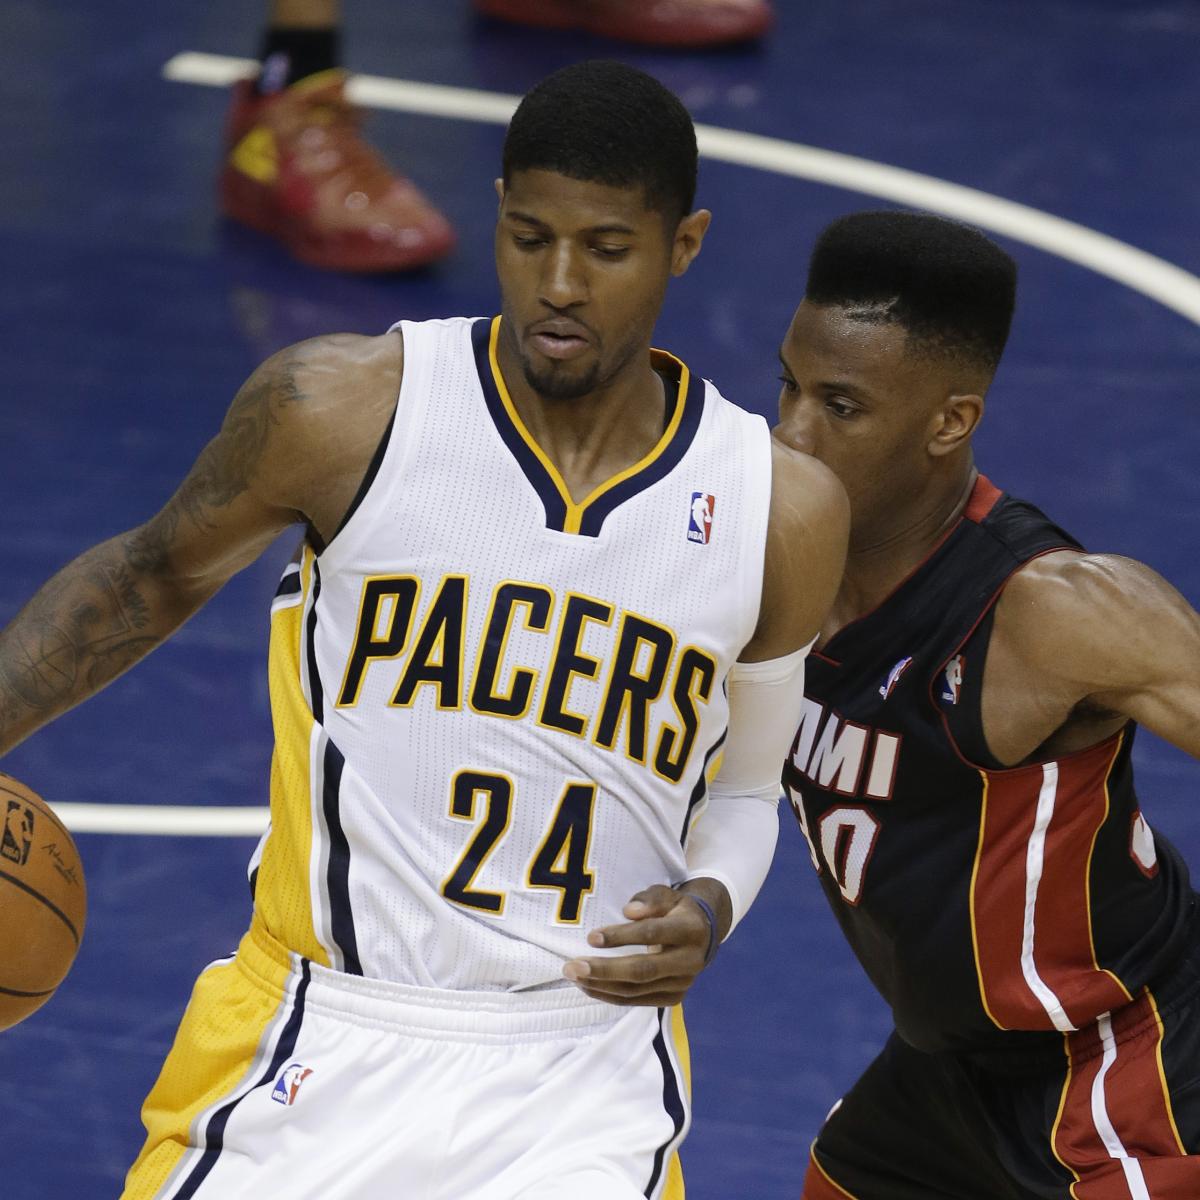 Pacers' Paul Sets Playoff Scoring Record for Miami Heat Opponent